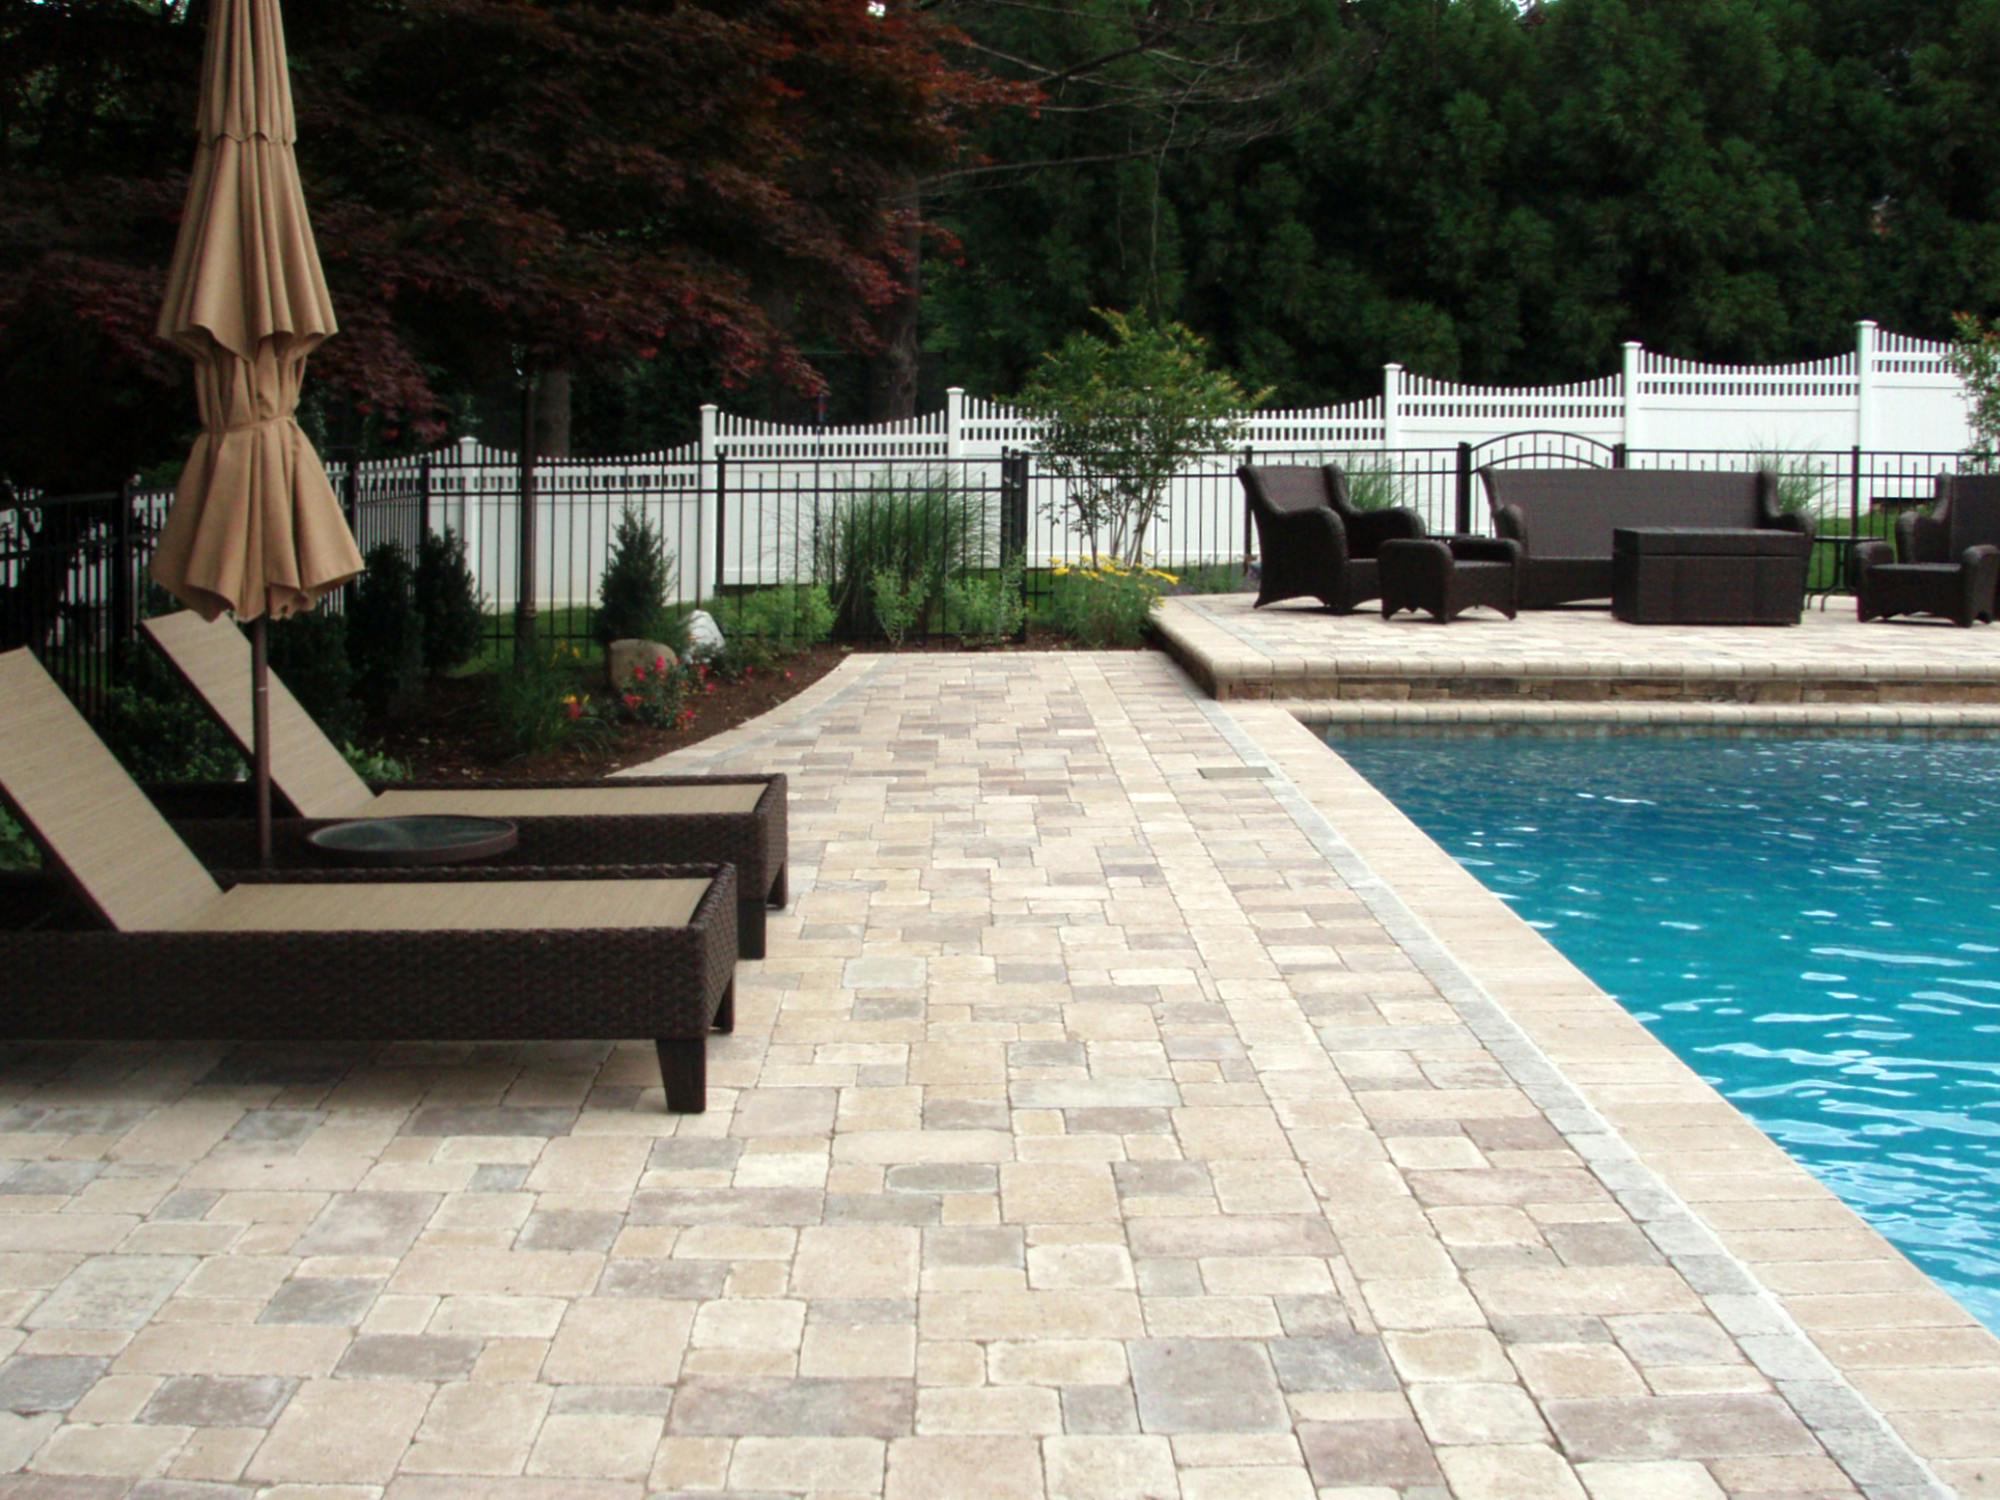 How to Choose Paving Stone Pavers for a Patio